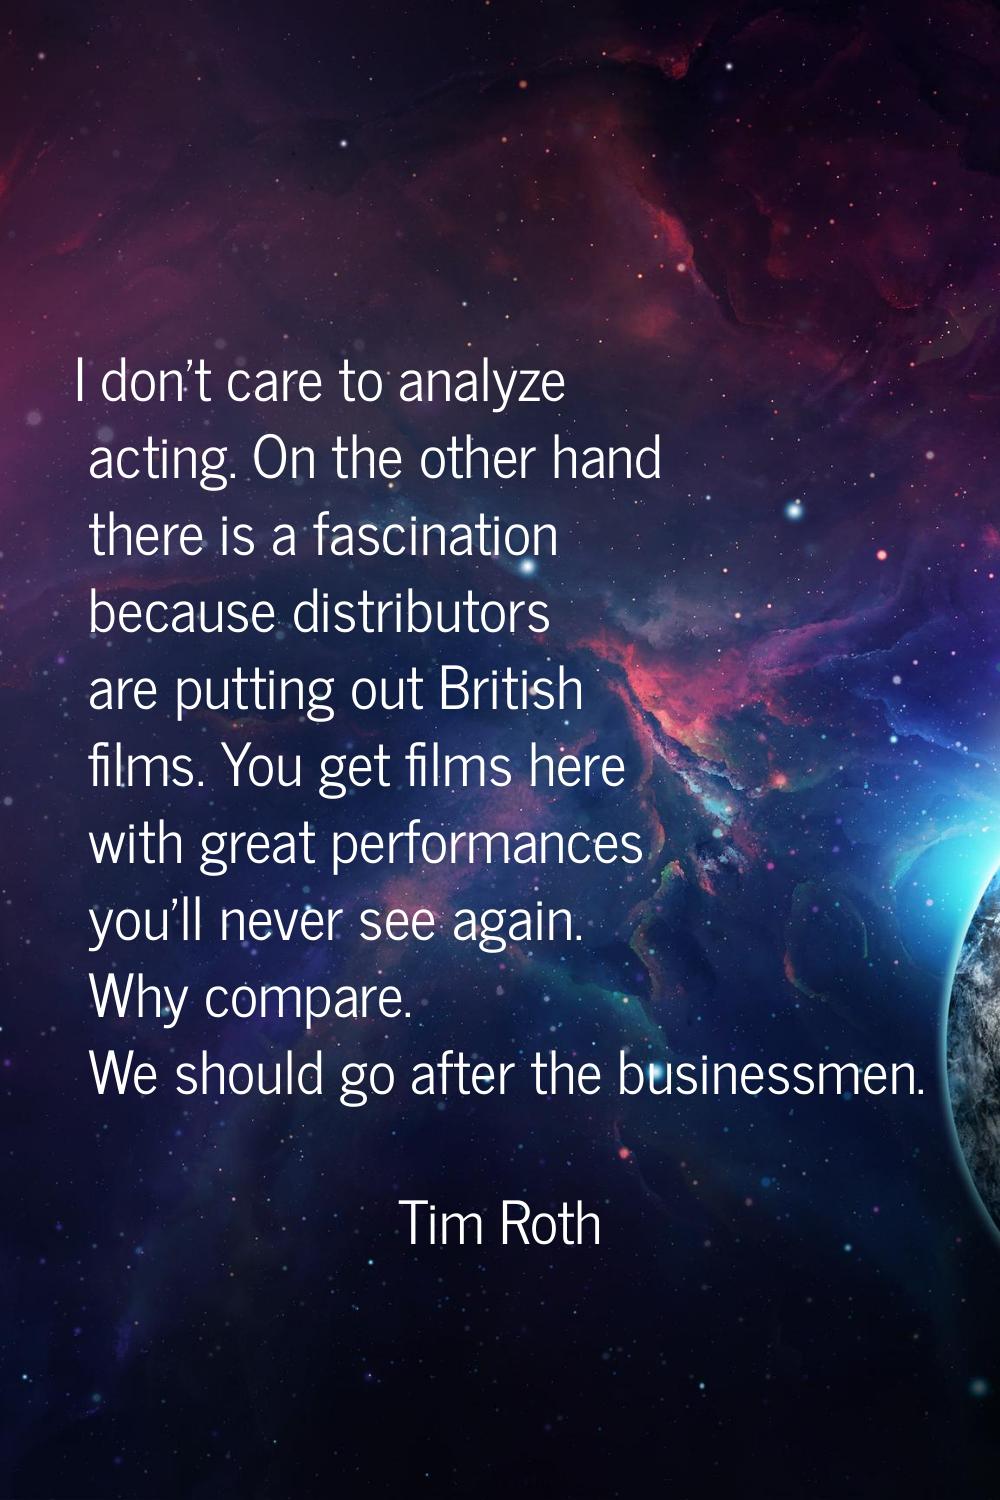 I don't care to analyze acting. On the other hand there is a fascination because distributors are p